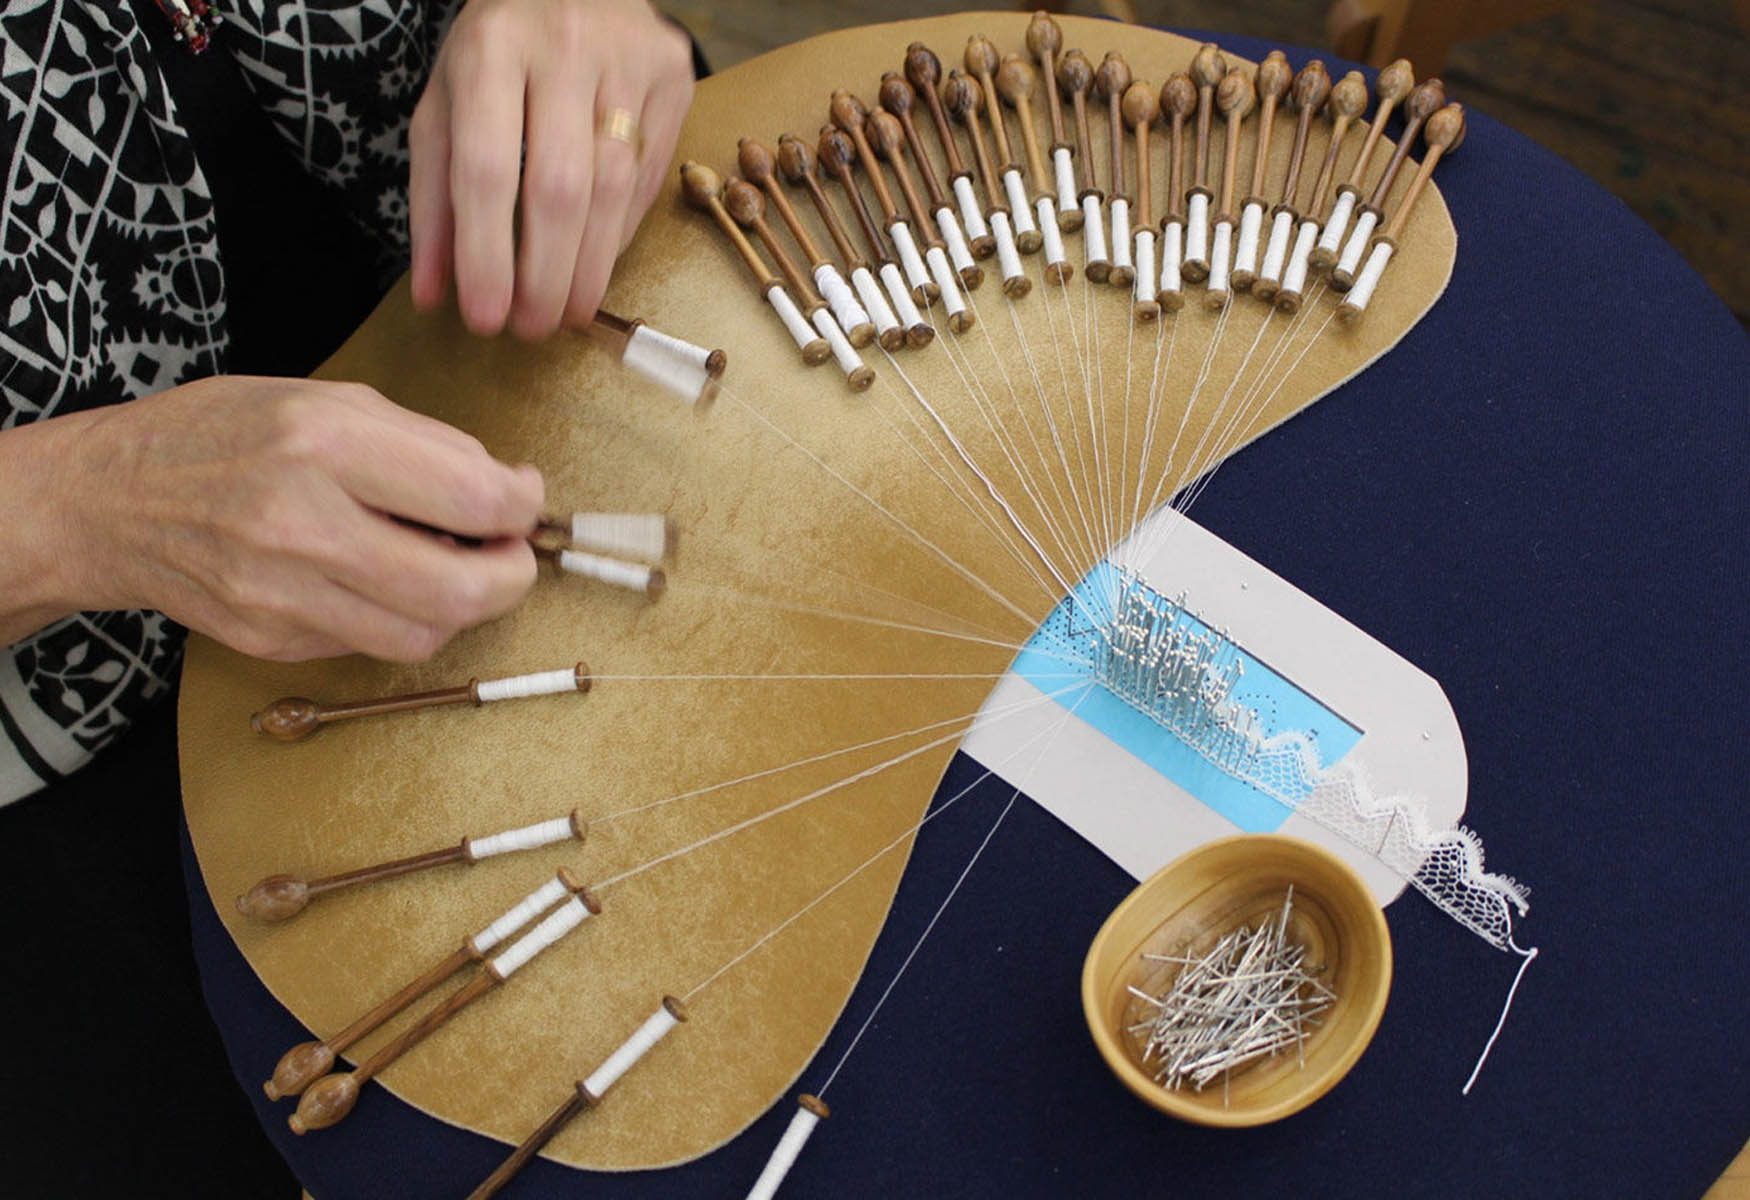 17-captivating-facts-about-bobbin-lace-making